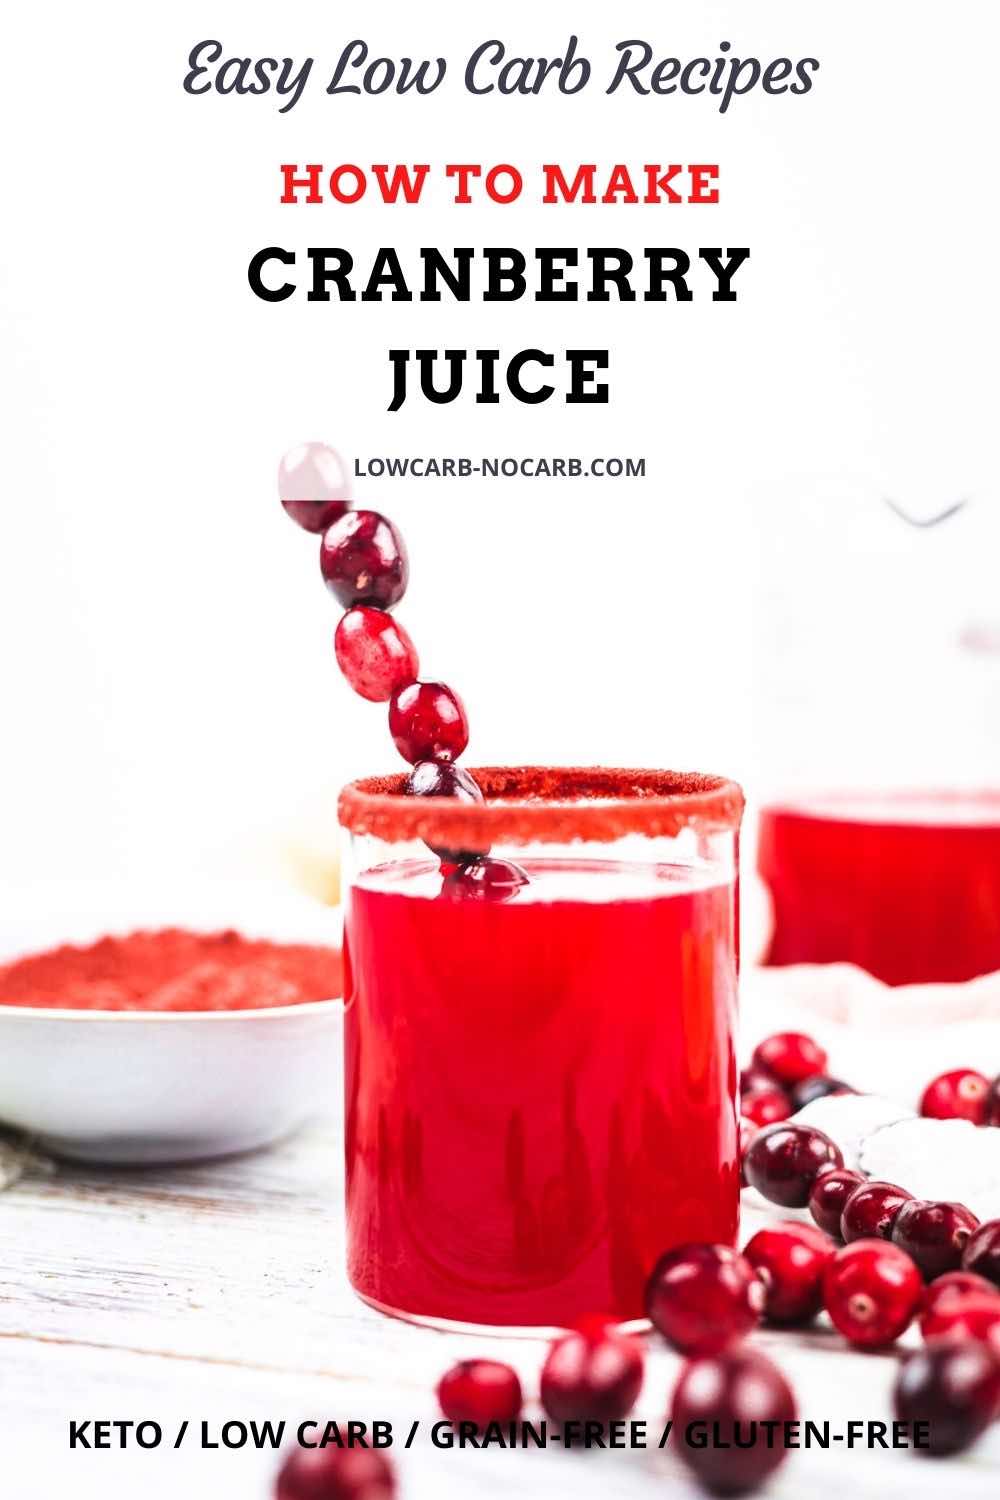 How to make cranberry juice.